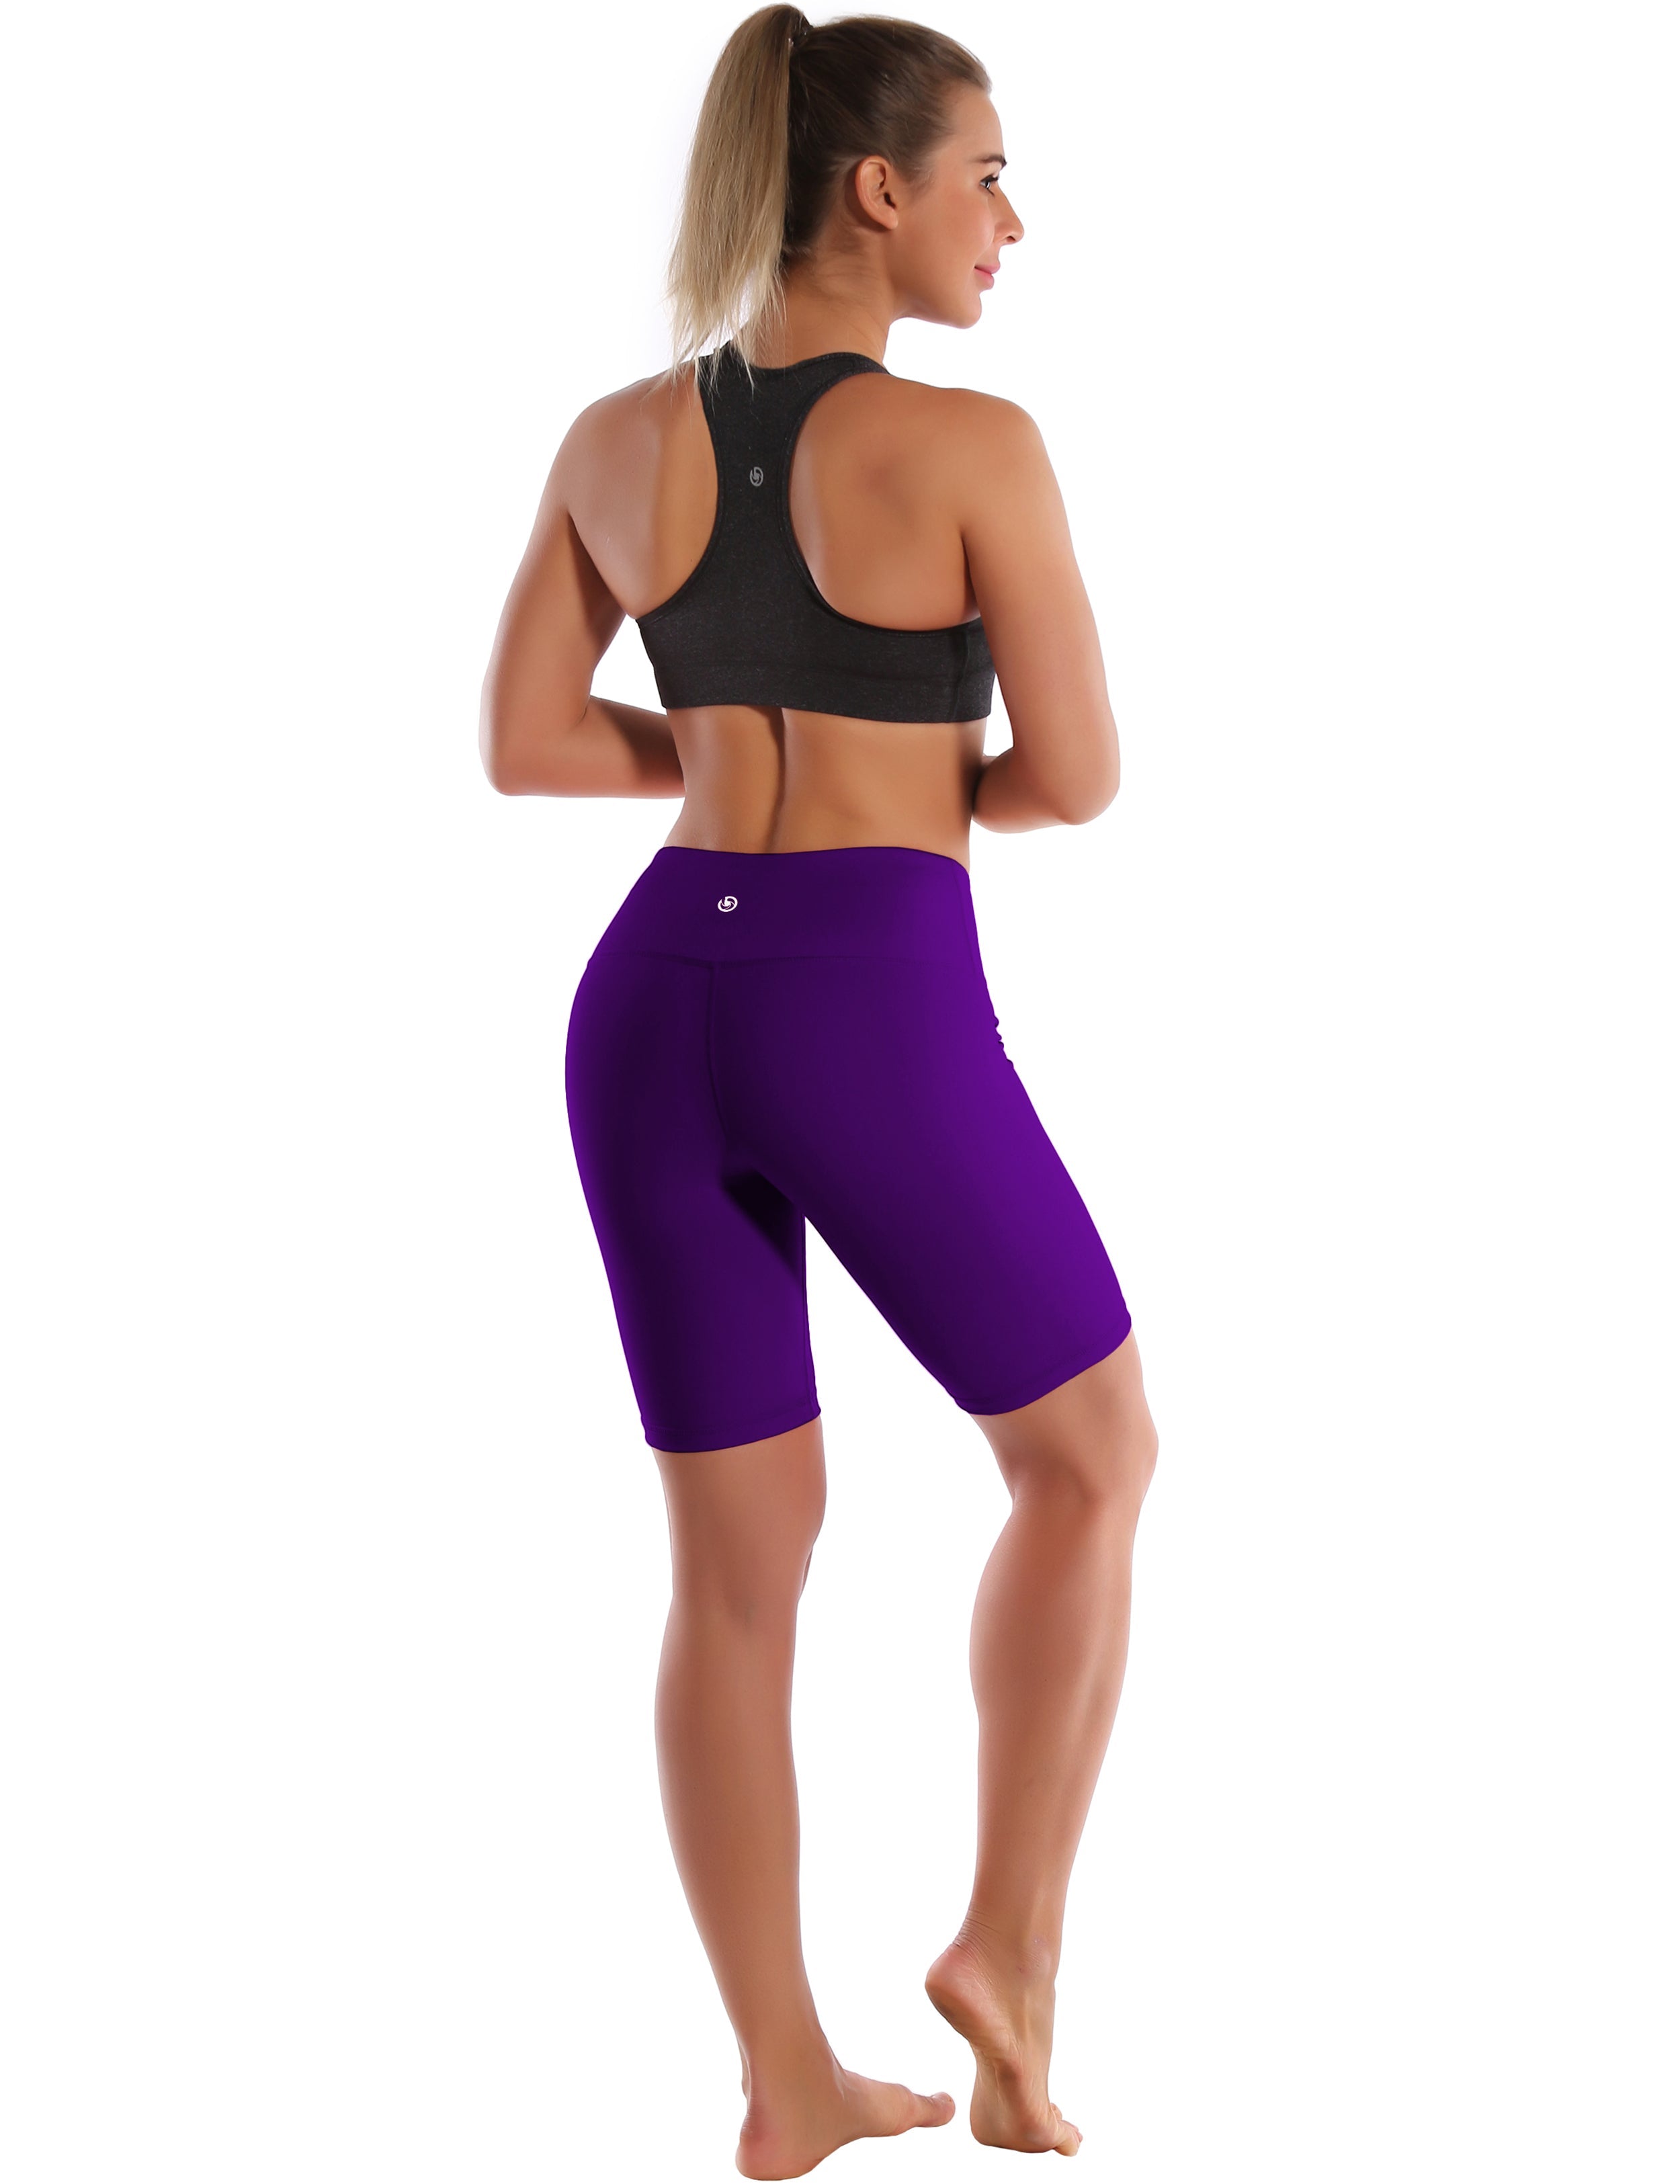 8" High Waist Golf Shorts eggplantpurple Sleek, soft, smooth and totally comfortable: our newest style is here. Softest-ever fabric High elasticity High density 4-way stretch Fabric doesn't attract lint easily No see-through Moisture-wicking Machine wash 75% Nylon, 25% Spandex